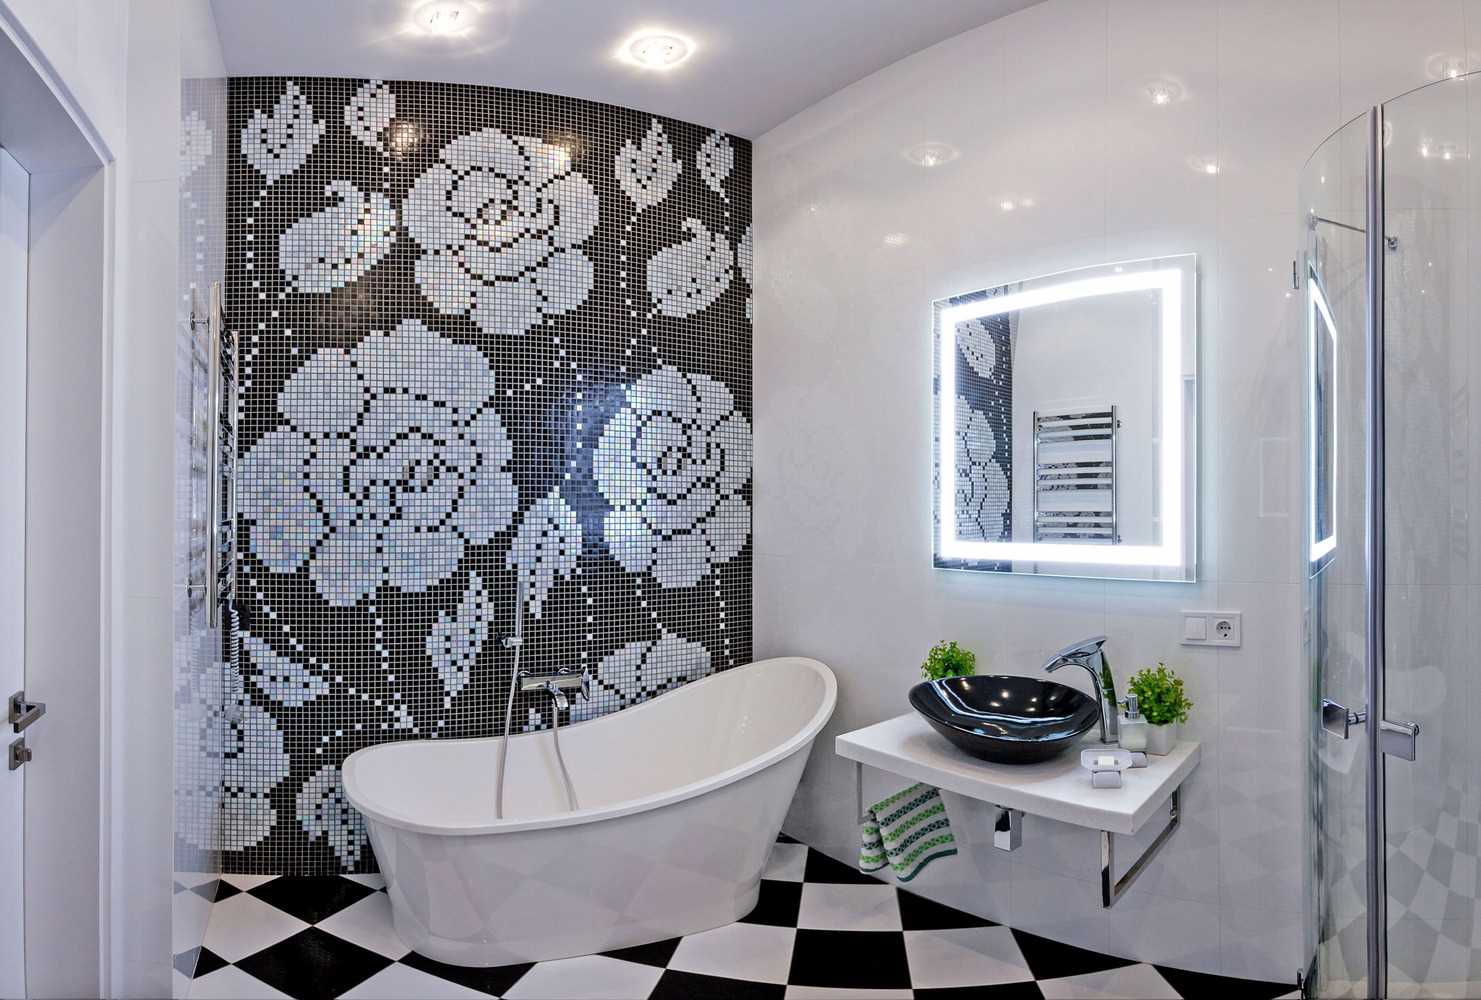 variant of the bright style of the bathroom in black and white